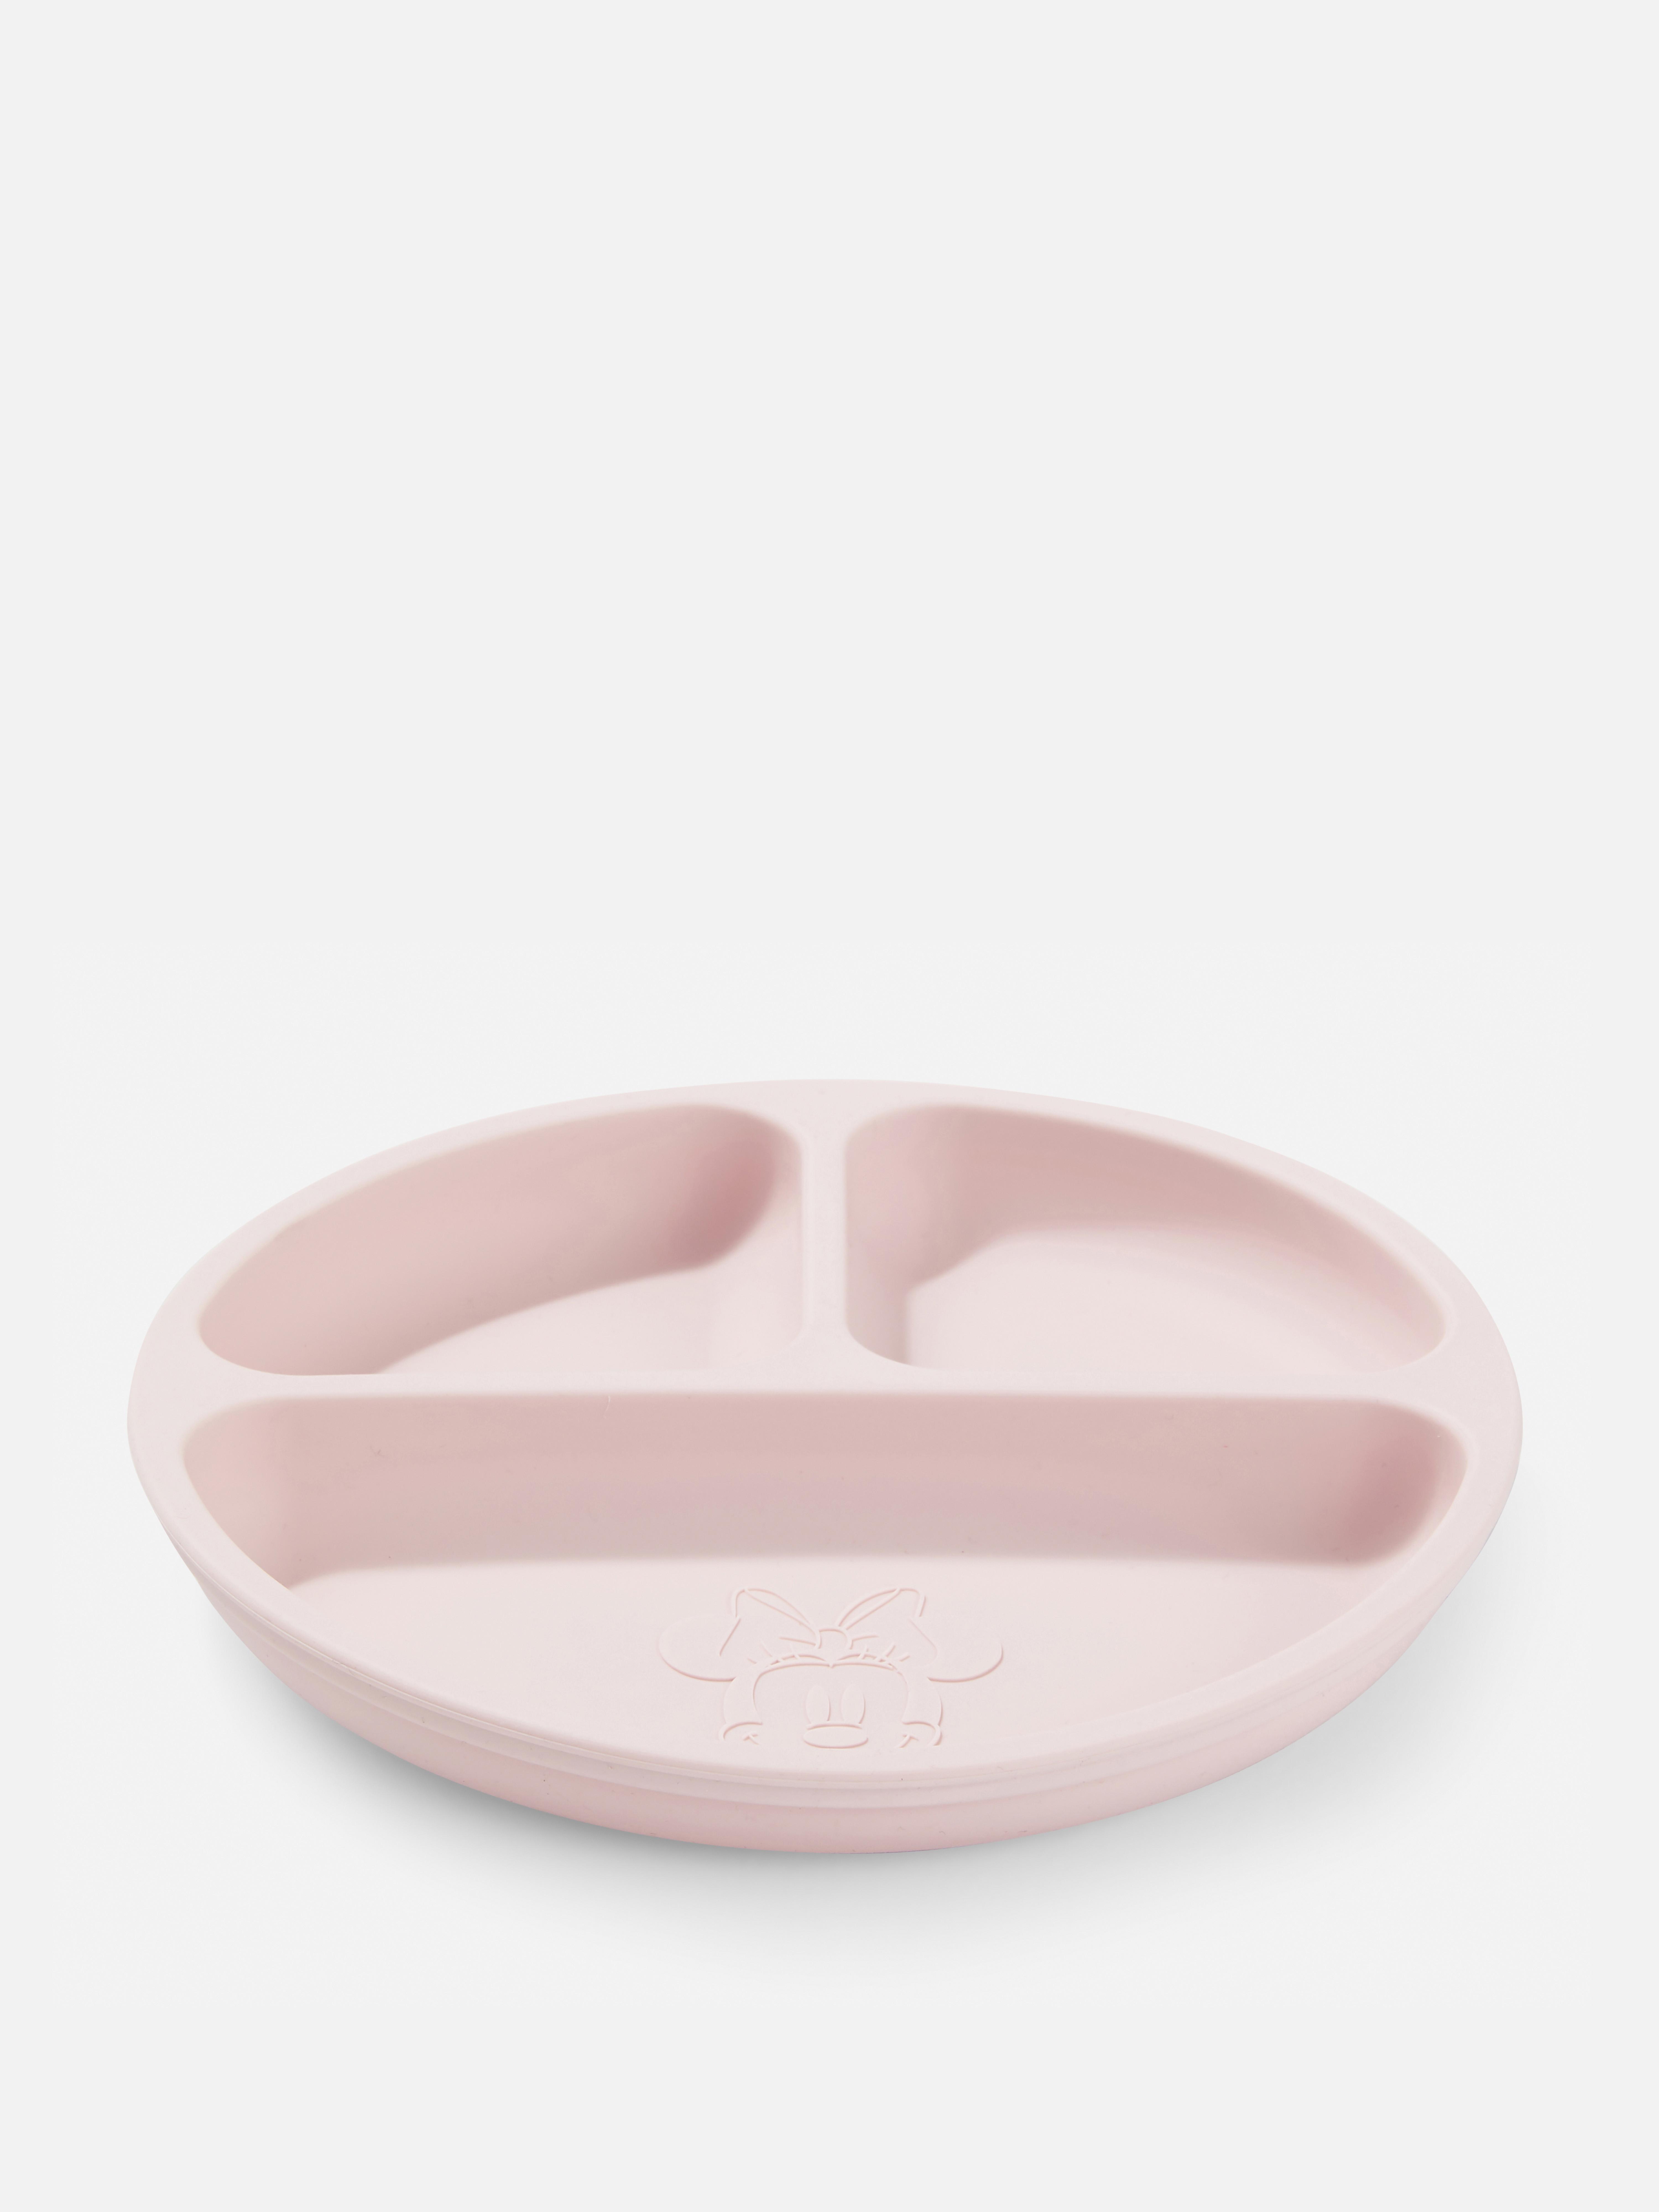 Disney's Minnie Mouse Silicone Section Plate Pink